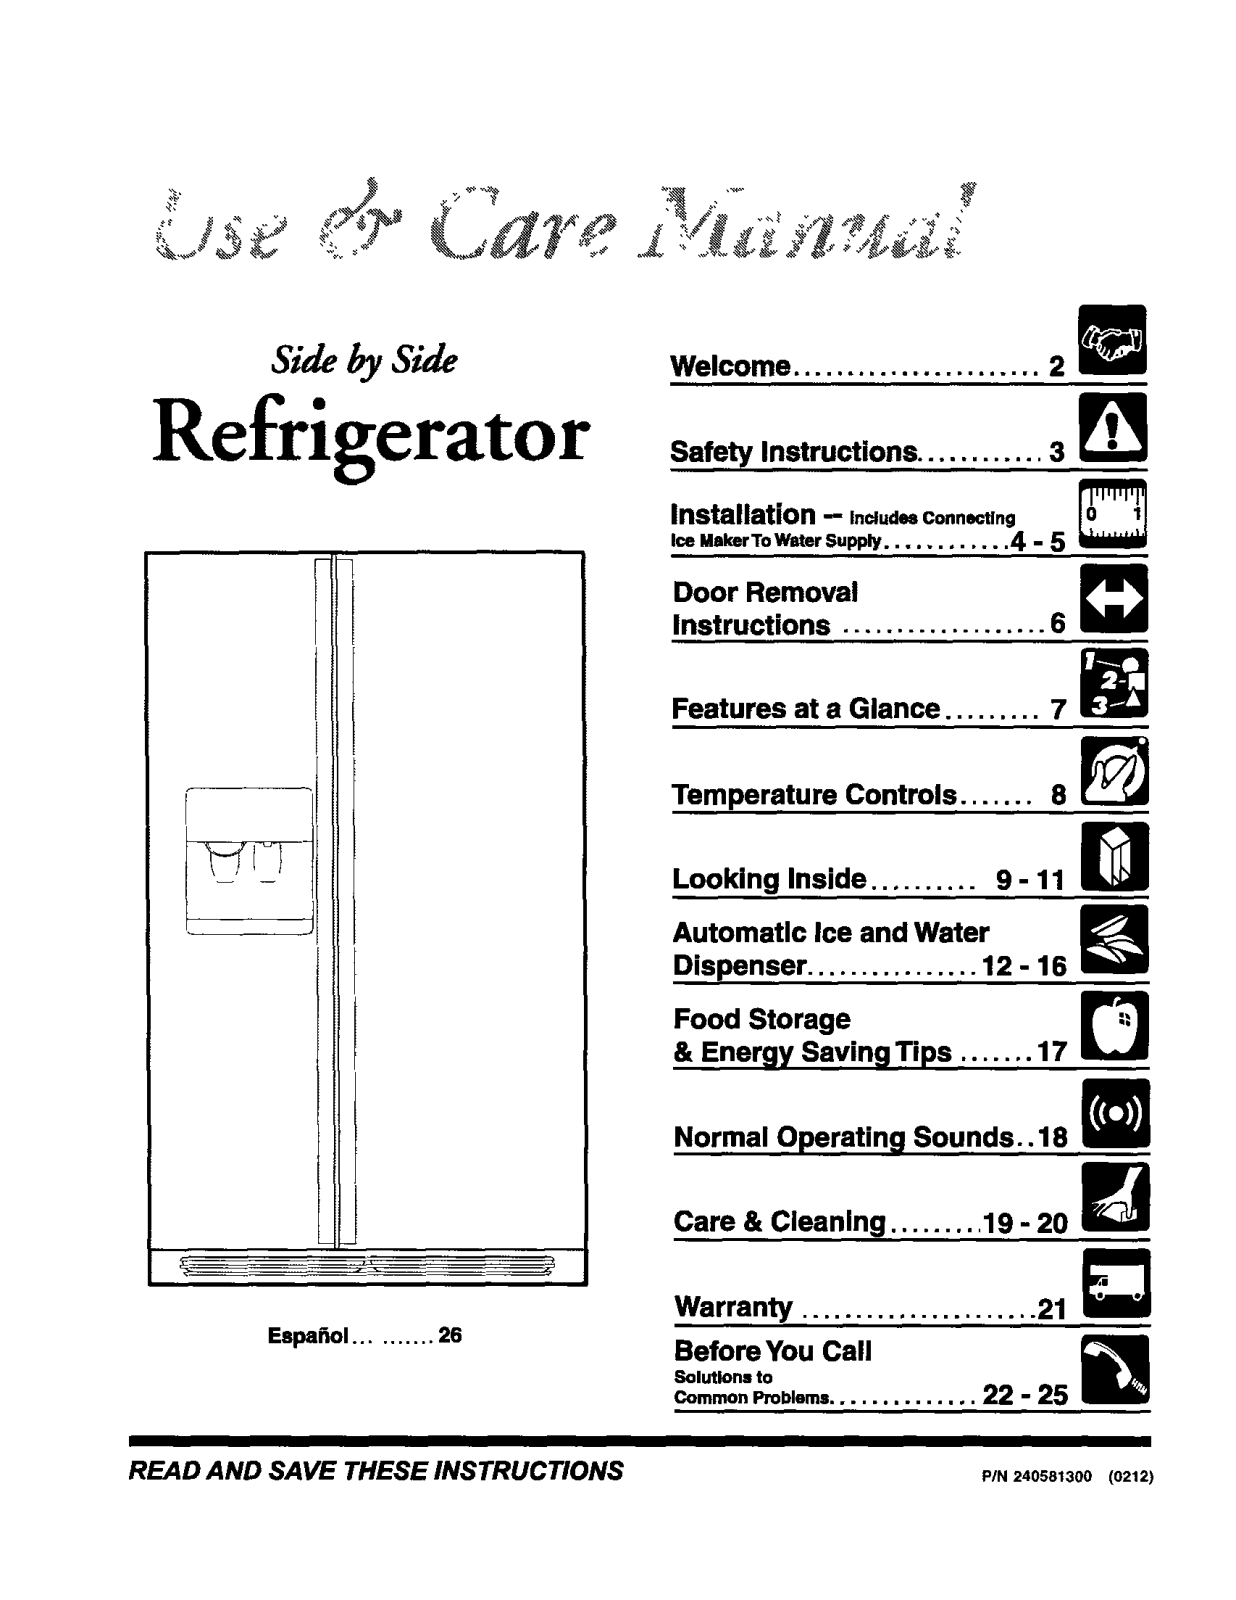 Frigidaire FRS26KR4CW1, FRS26KR4CQ1, FRS26KR4CQ0, FRS26KR4CB1, FRS26KF5CW1 Owner’s Manual